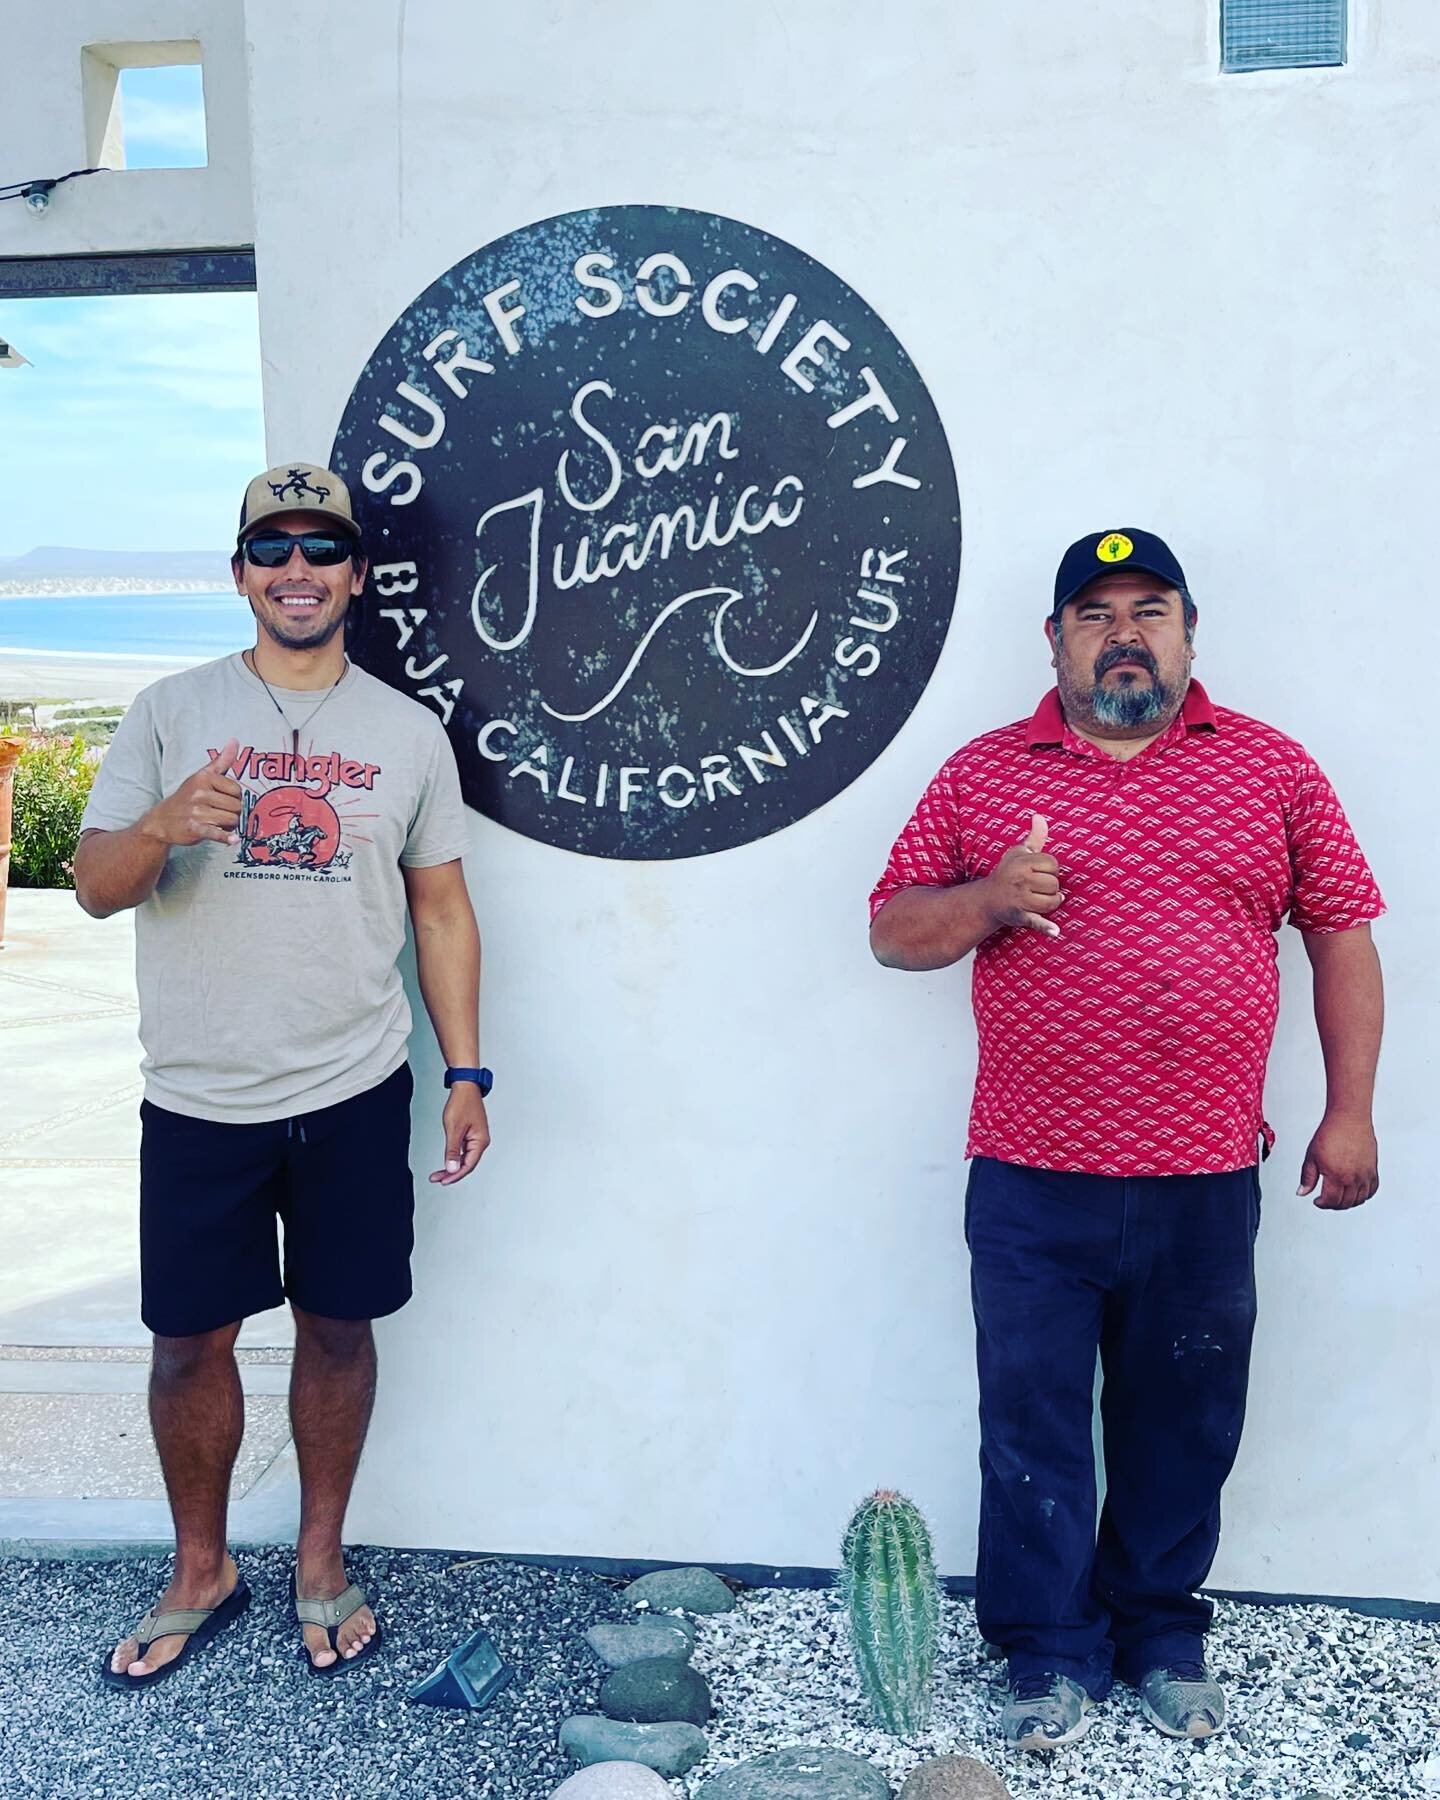 Thanks Jeff and Josue @sjsurfsociety for putting my folks and I up at your world class surf compound here in San Juanico, looking forward to more trips this summer. If you&rsquo;re looking for a basecamp well suited for binge reading, exploring Baja 